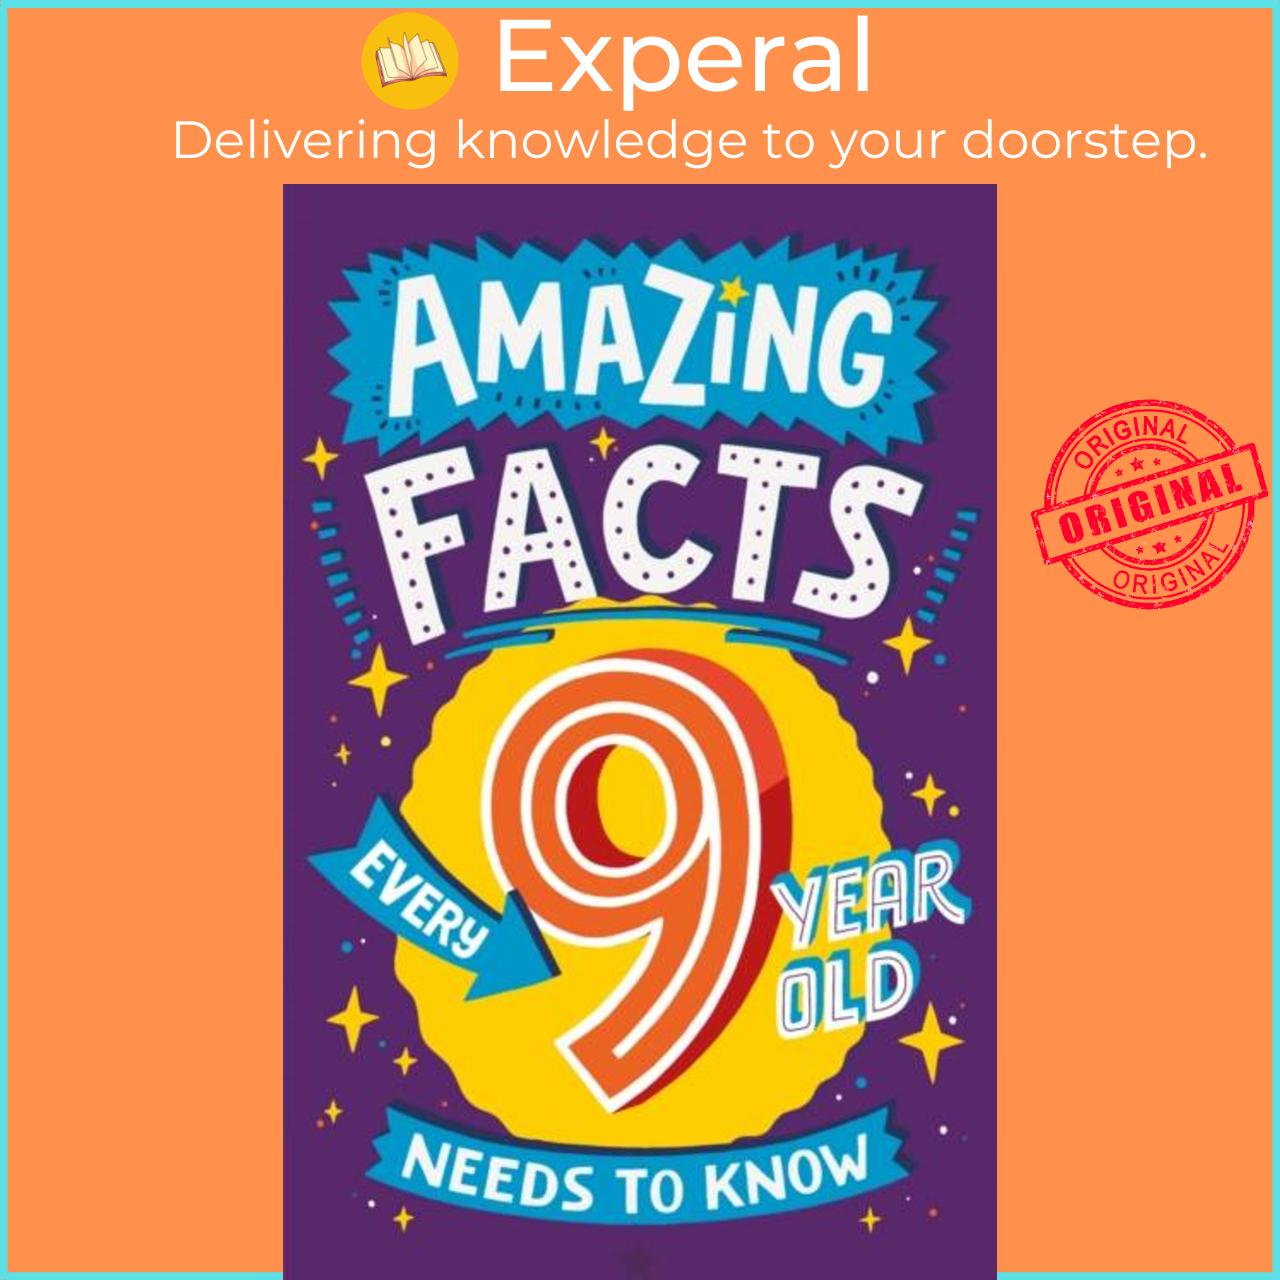 Sách - Amazing Facts Every 9 Year Old Needs to Know by Chris Dickason (UK edition, paperback)